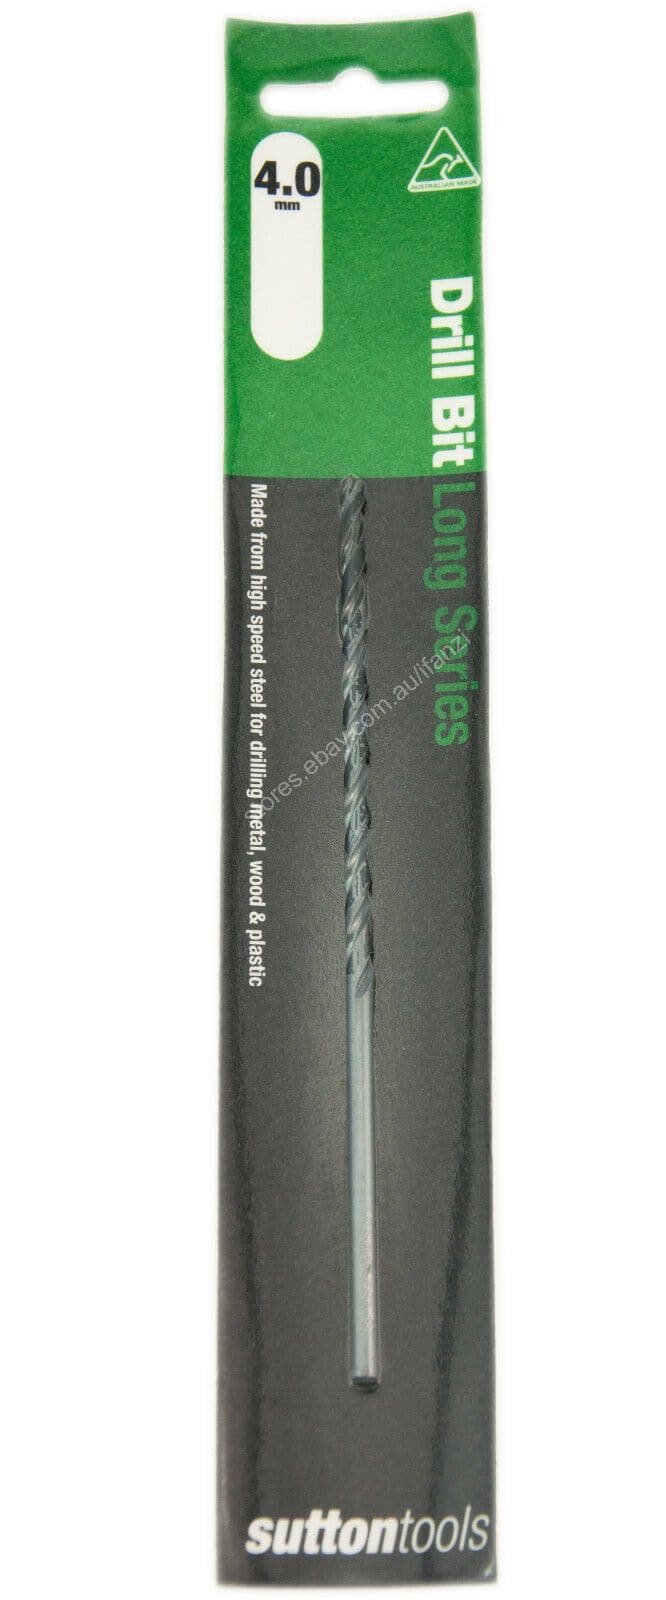 suttontools Metric HSS Long Series Drill Bits For Metal, Wood, Plastic 4mm - Double Bay Hardware